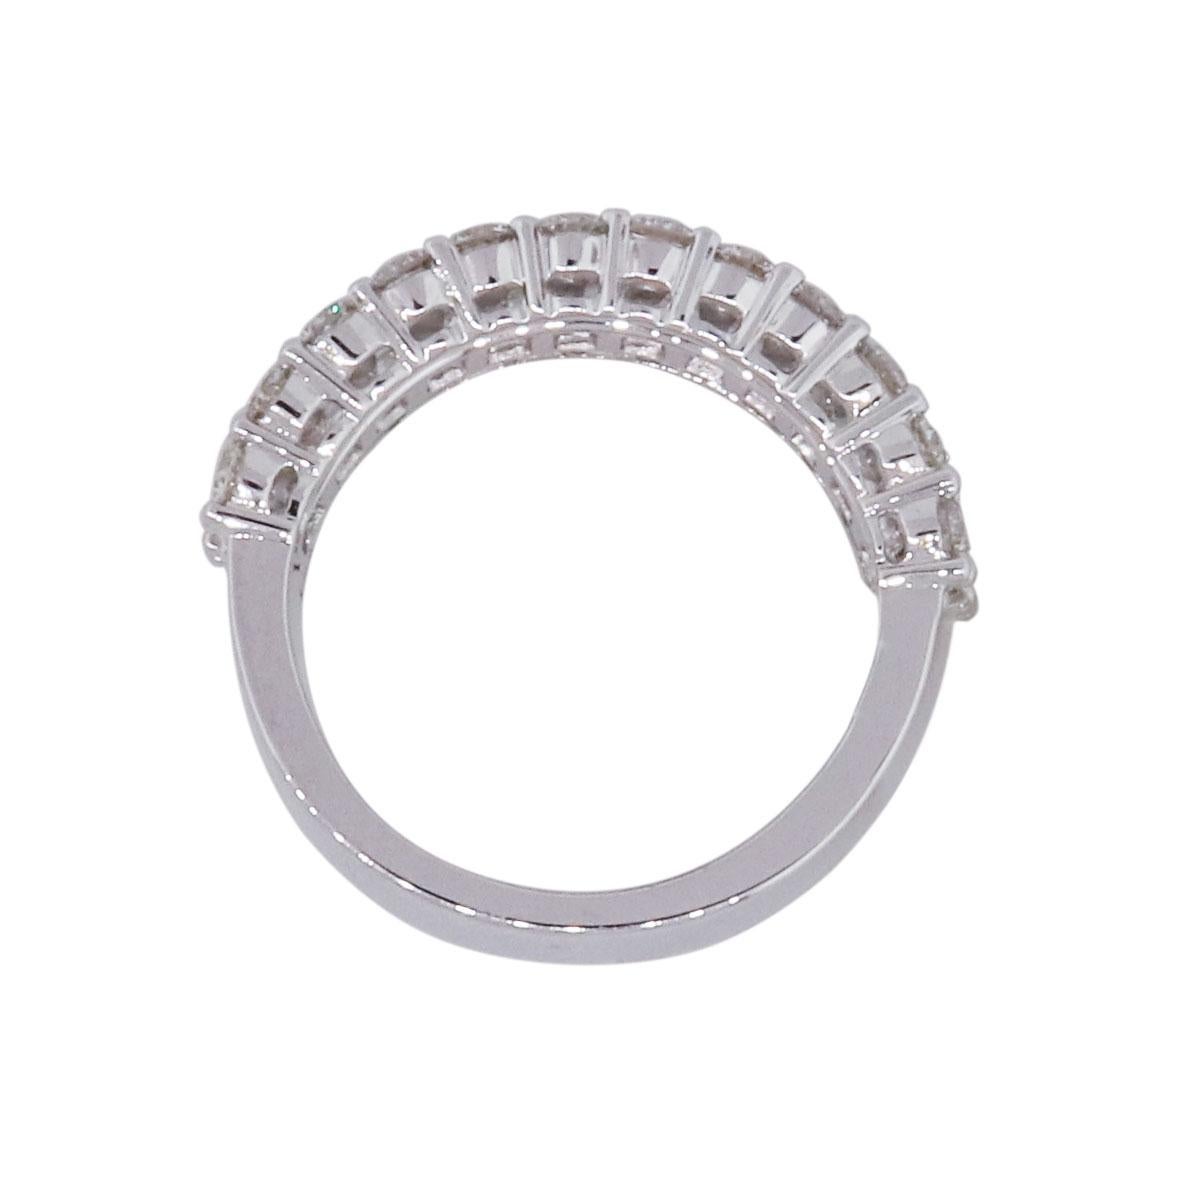 Material: 18k white gold
Diamond Details: Approximately 1.37ctw of round brilliant diamonds, 24 stones. Approximately 0.96ctw of emerald cut diamonds, 16 stones Diamonds are G/H in color and VS in clarity
Ring Size: 6.50 (can be sized)
Ring